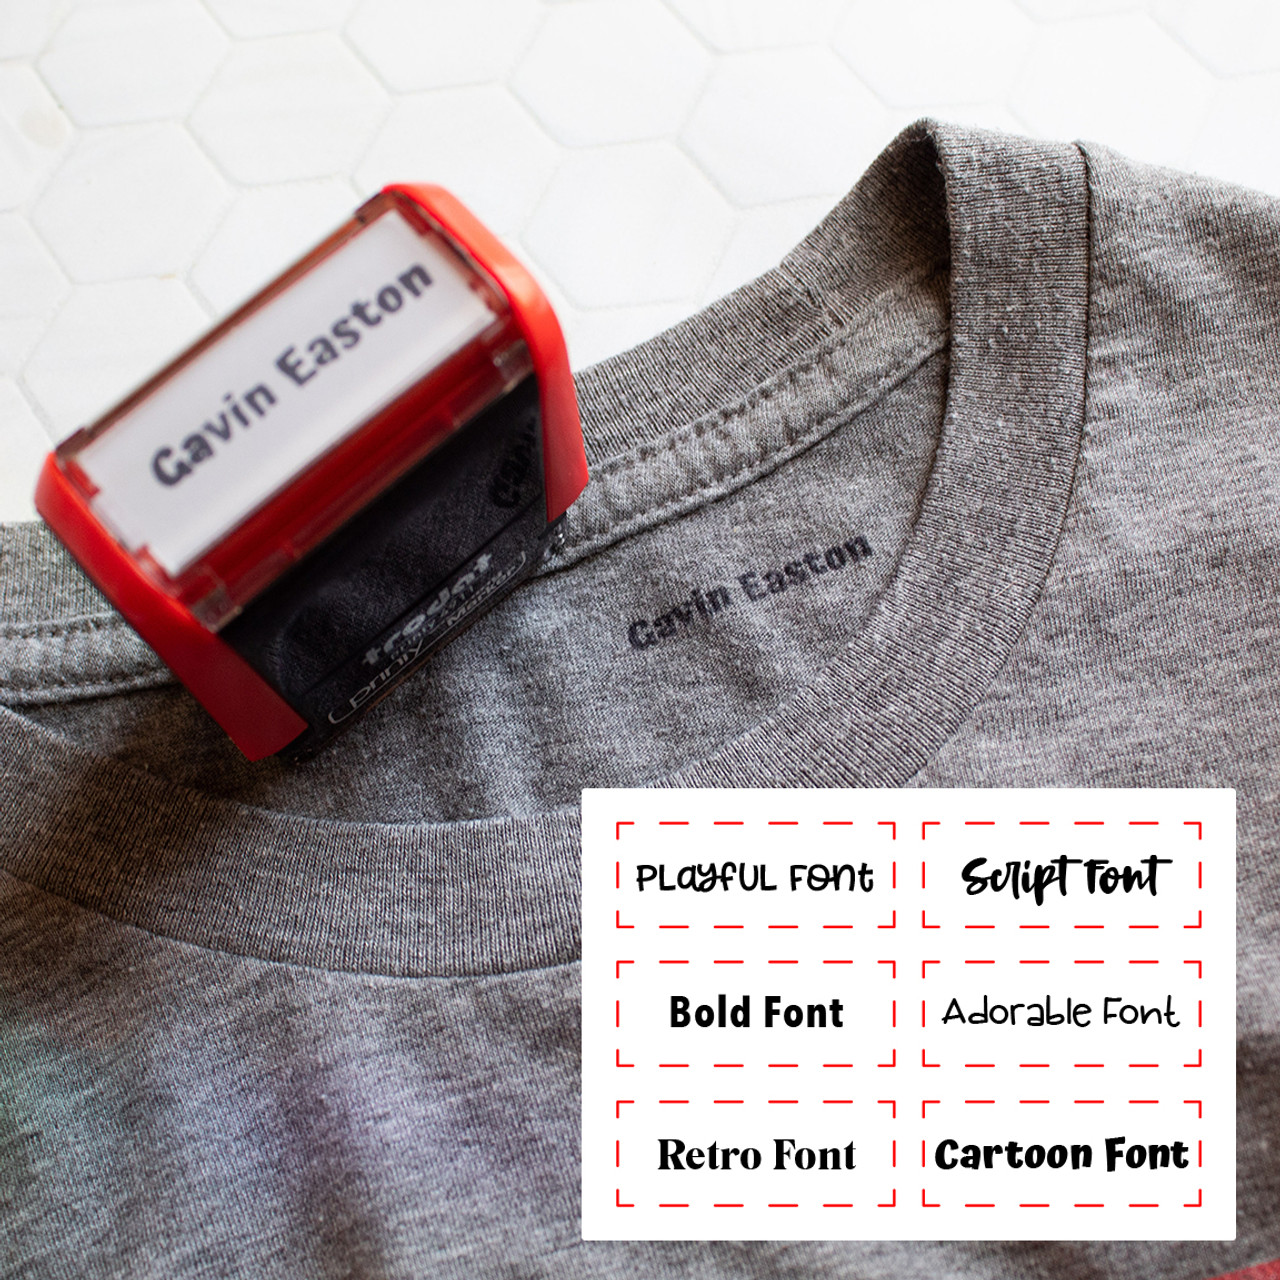 labeling-your-clothes-with-a-custom-clothing-stamp-is-a-simple-and-enjoyable-process